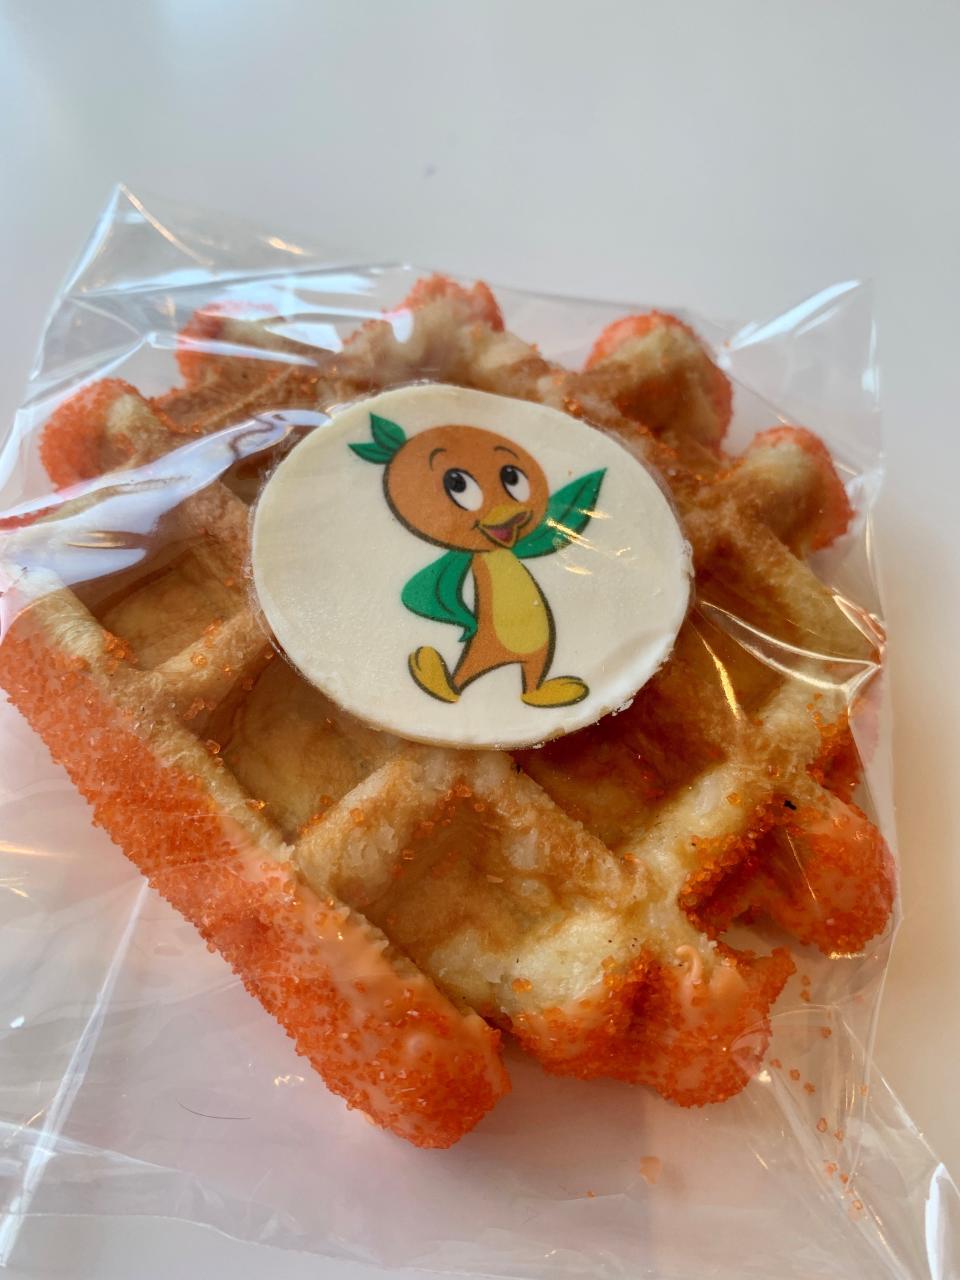 The Orange Bird Liege Waffle, available at the Starbucks in Connections Cafe, makes the perfect sweet ending to a culinary trip around the world at the Epcot International Flower & Garden Festival.